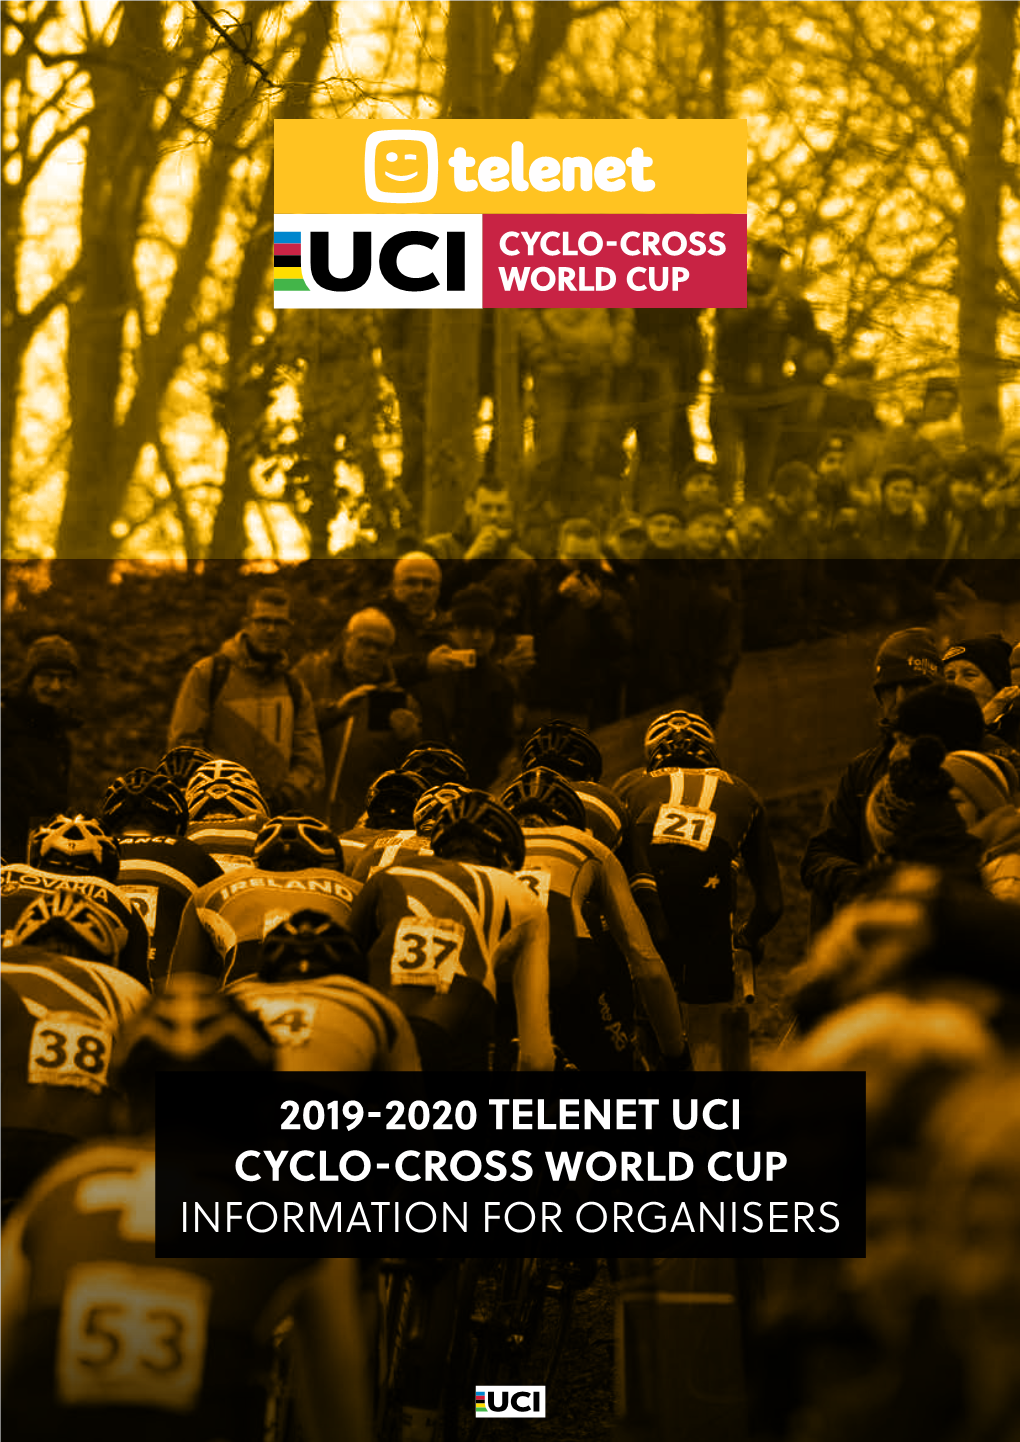 2019-2020 Telenet Uci Cyclo-Cross World Cup Information for Organisers 1.Foreword